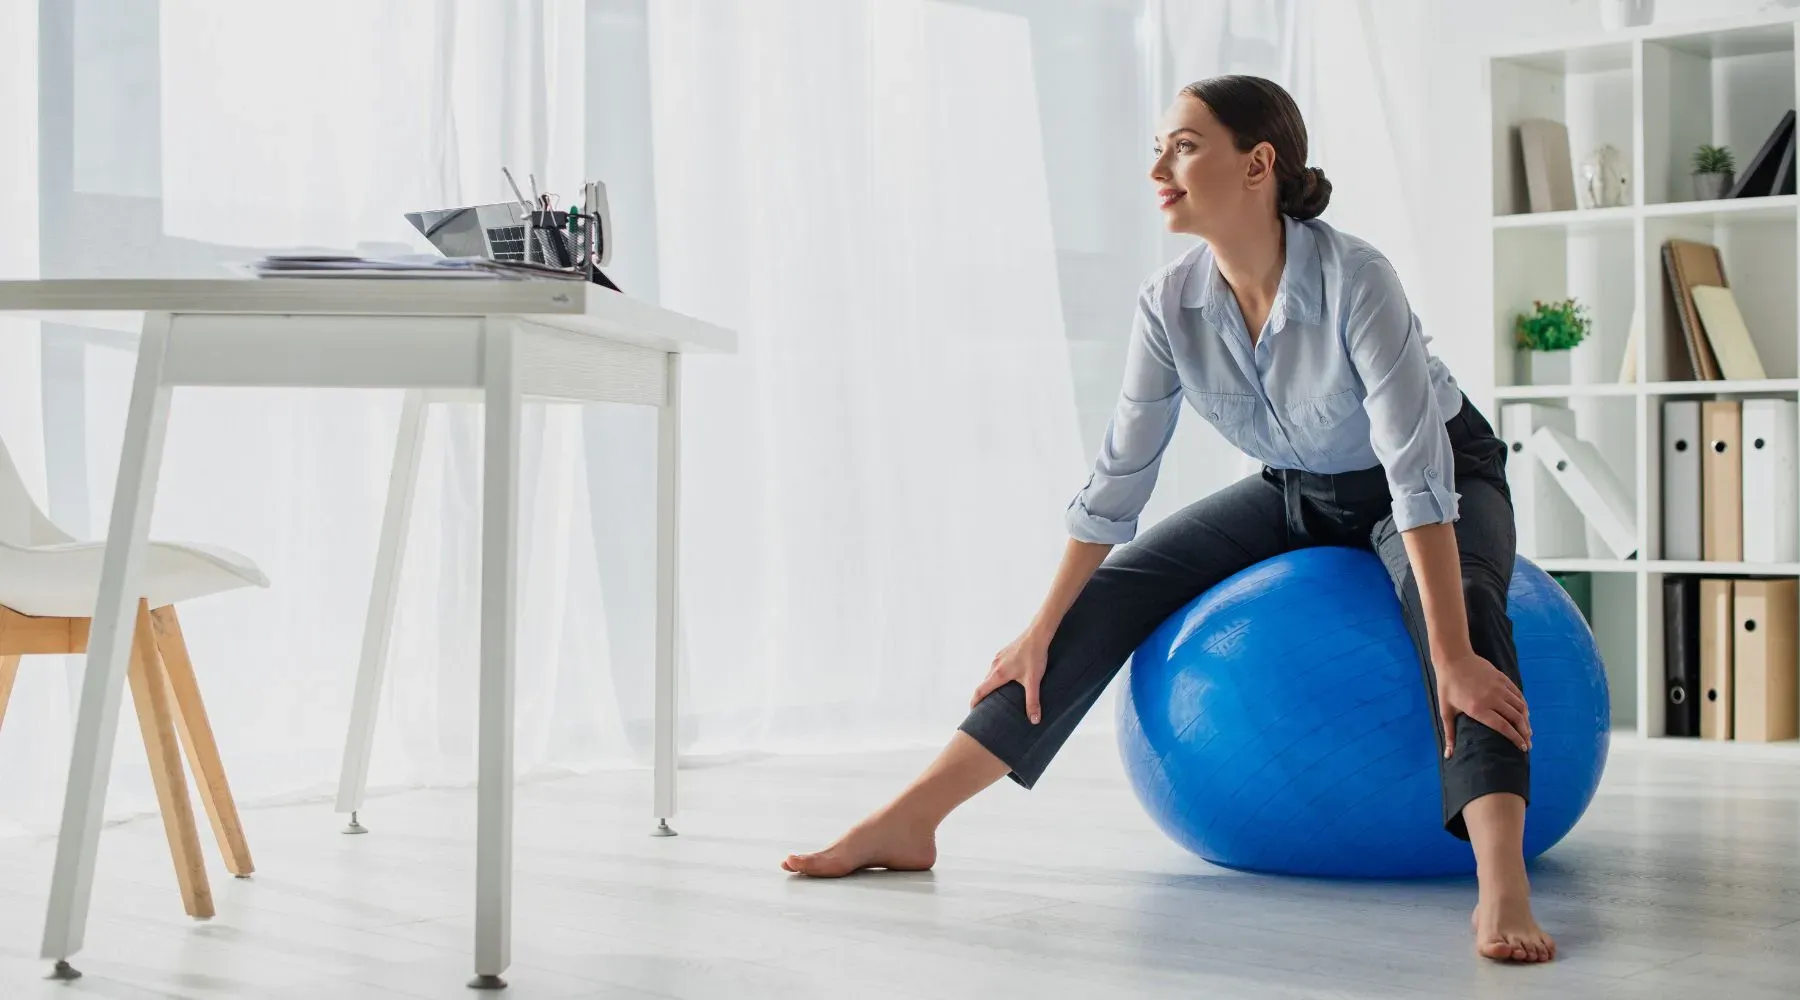 A business woman sitting barefoot on an exercise ball in her office